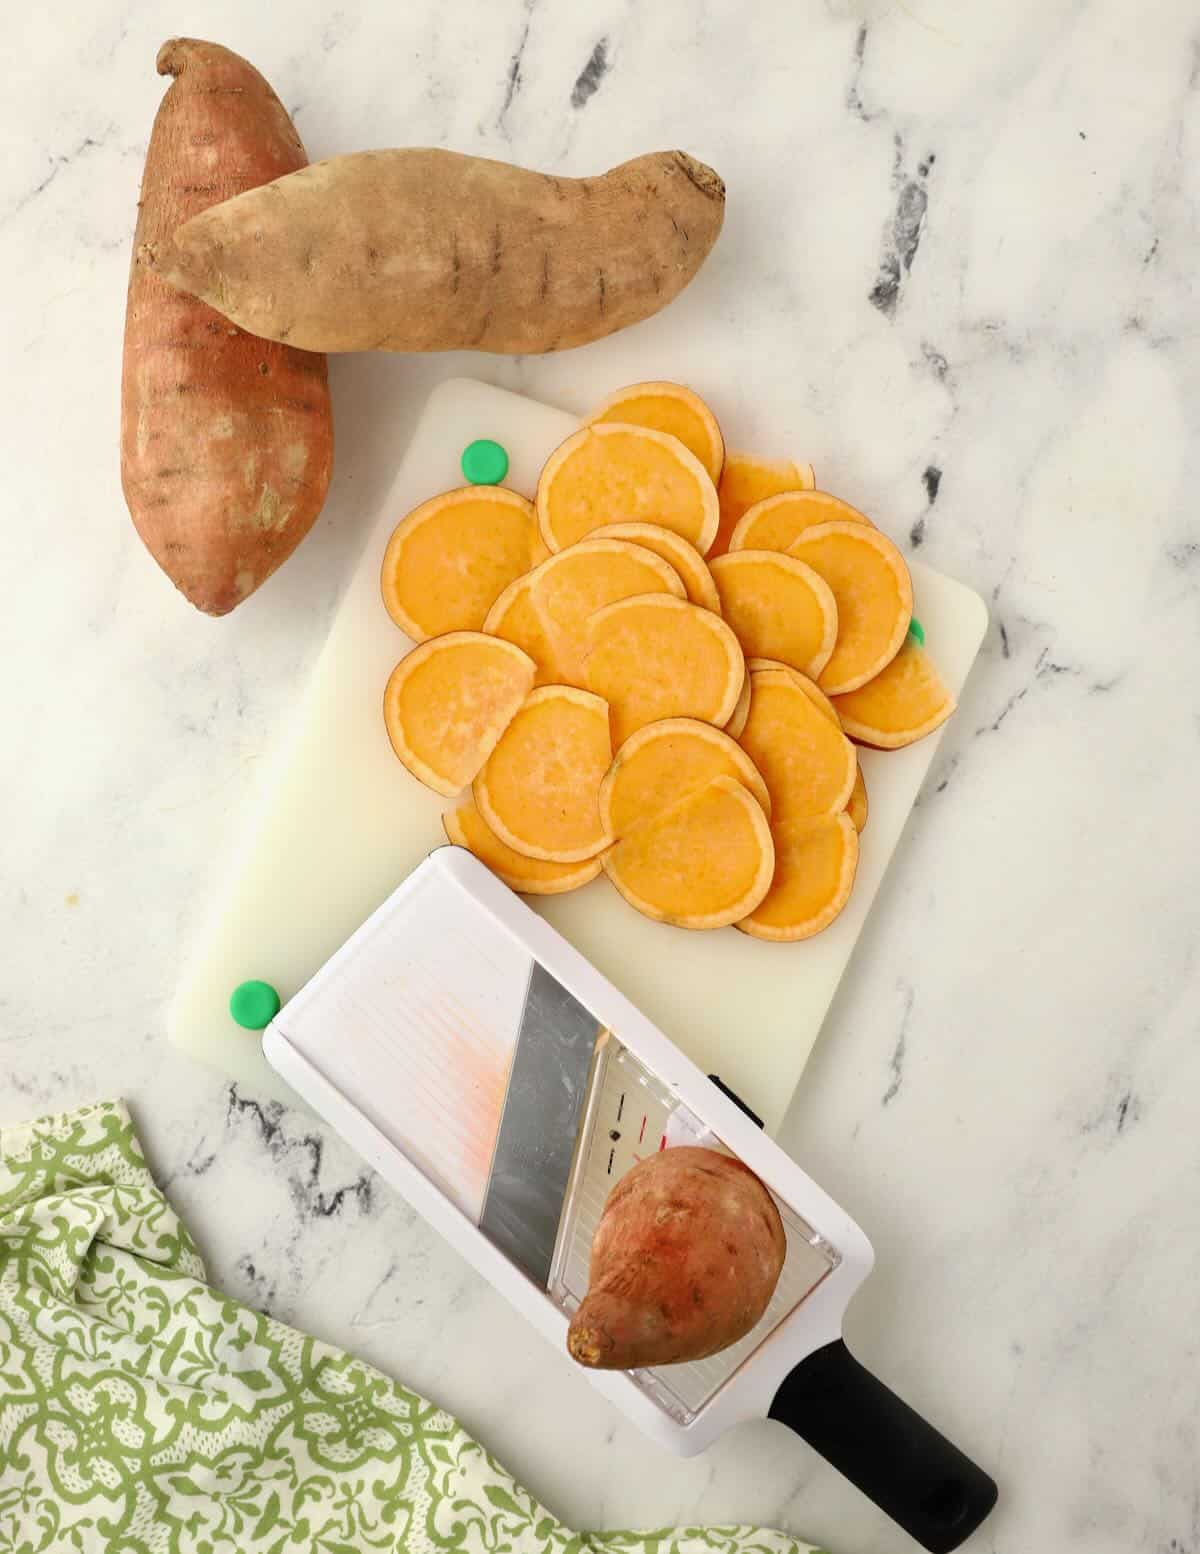 A mandoline and sliced sweet potatoes on a cutting board.  